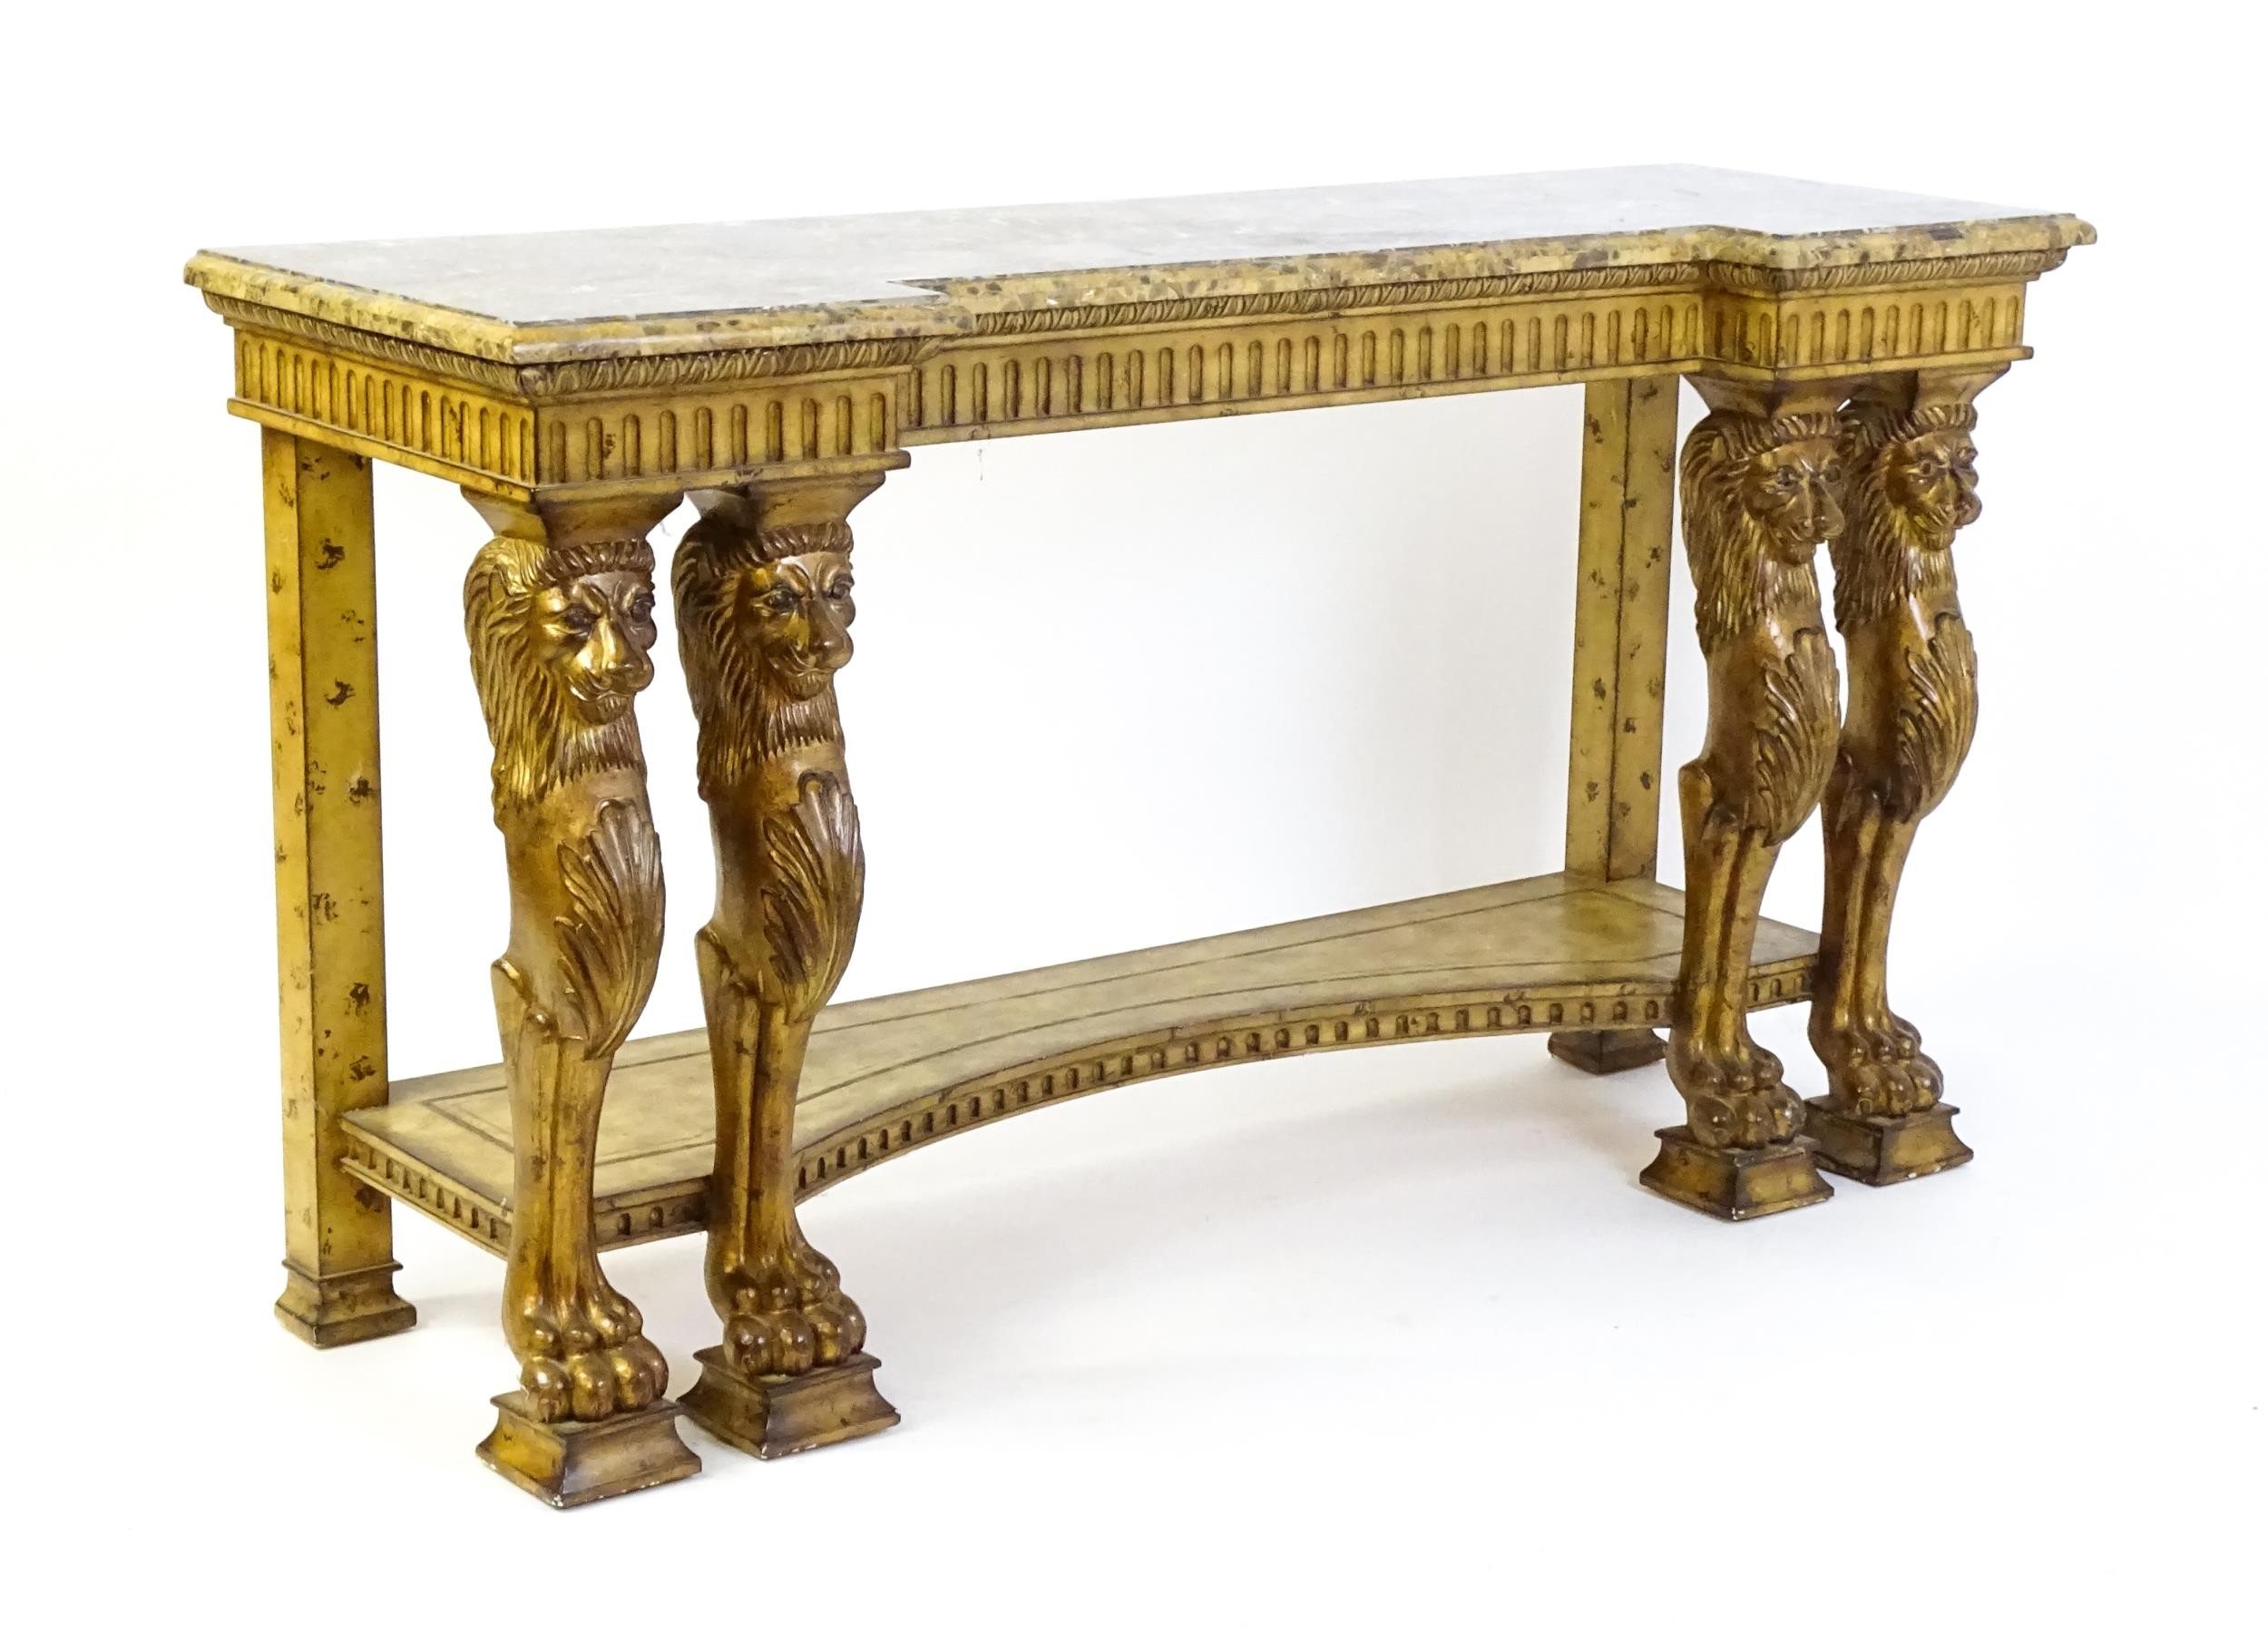 A late 20thC marble and wooden topped inverted break front console table with two pairs of lion